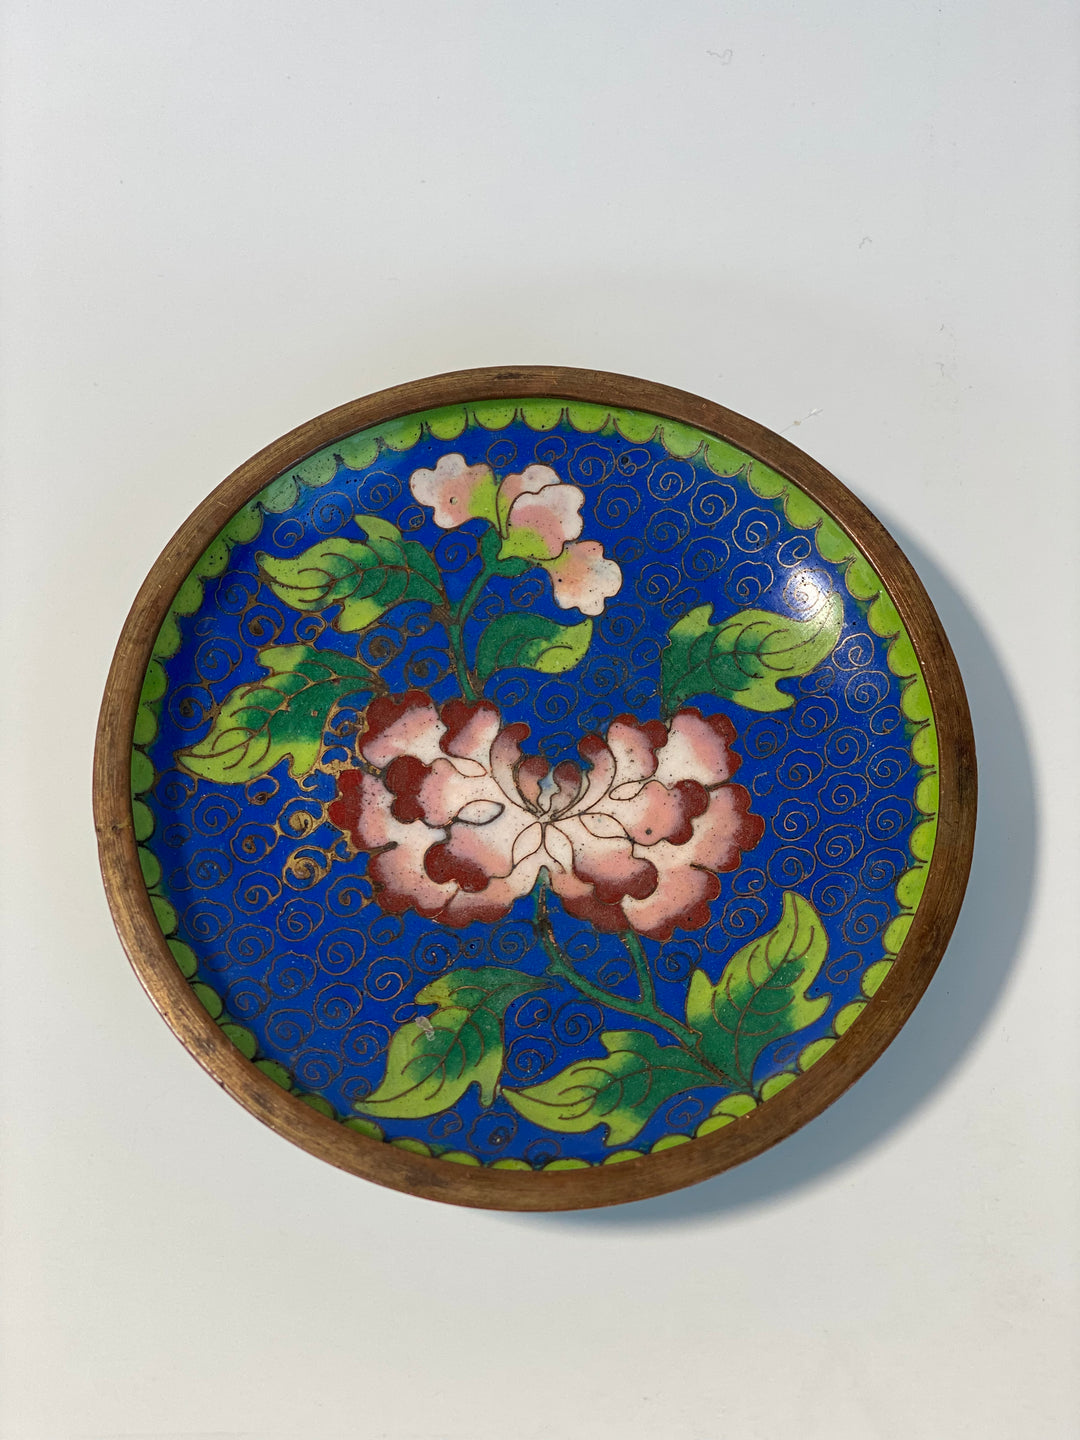 Vintage Cloisonné Enamel and Copper Small Catch-All Tray (4")